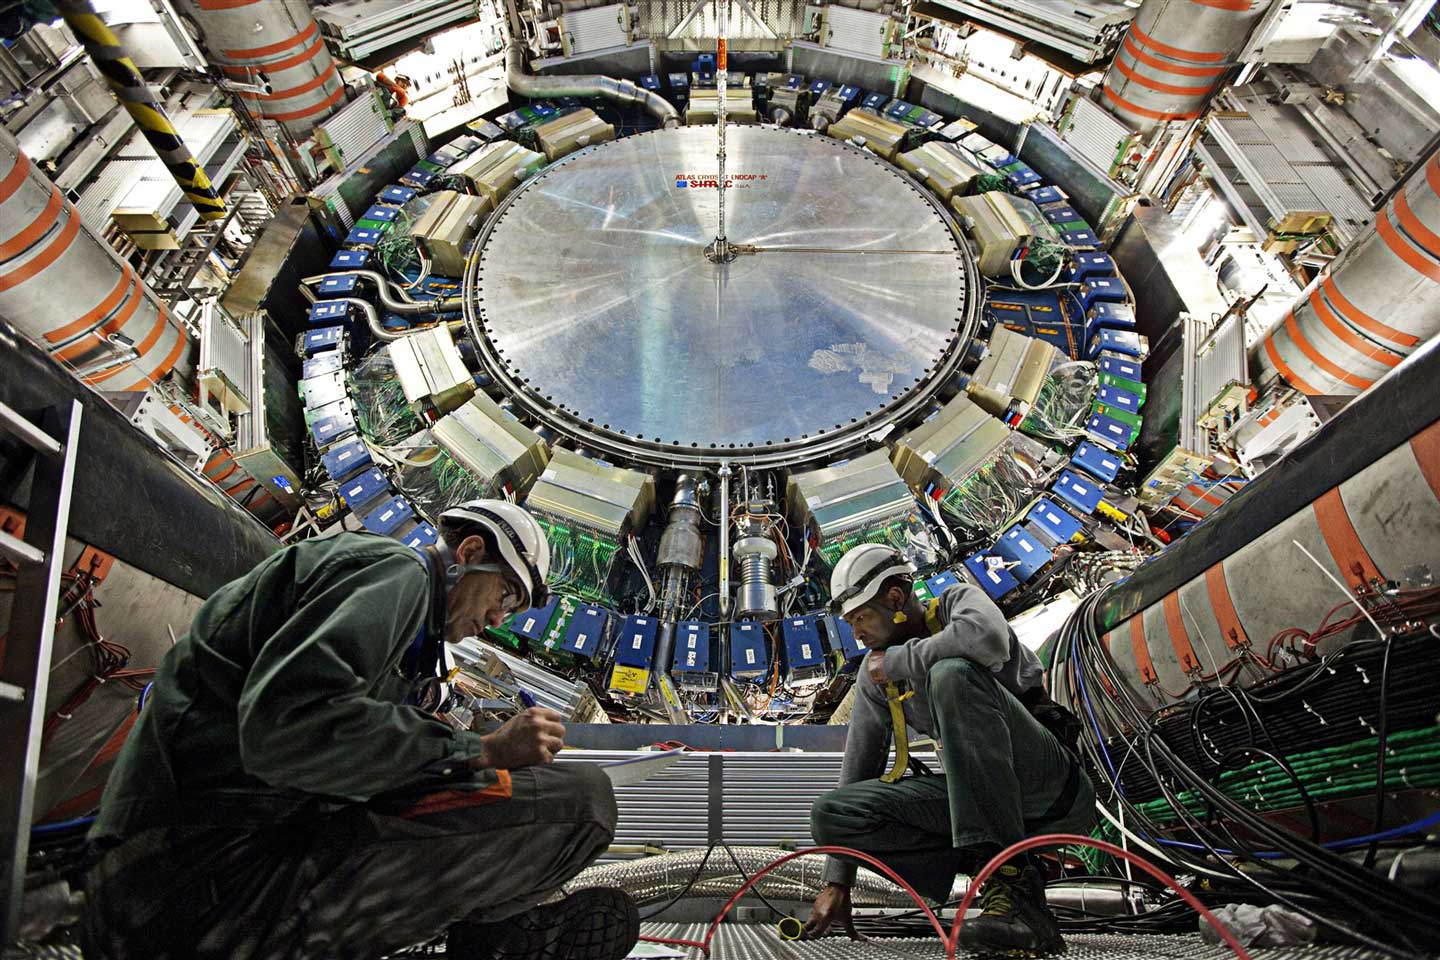 What to expect from the LHC in 2012